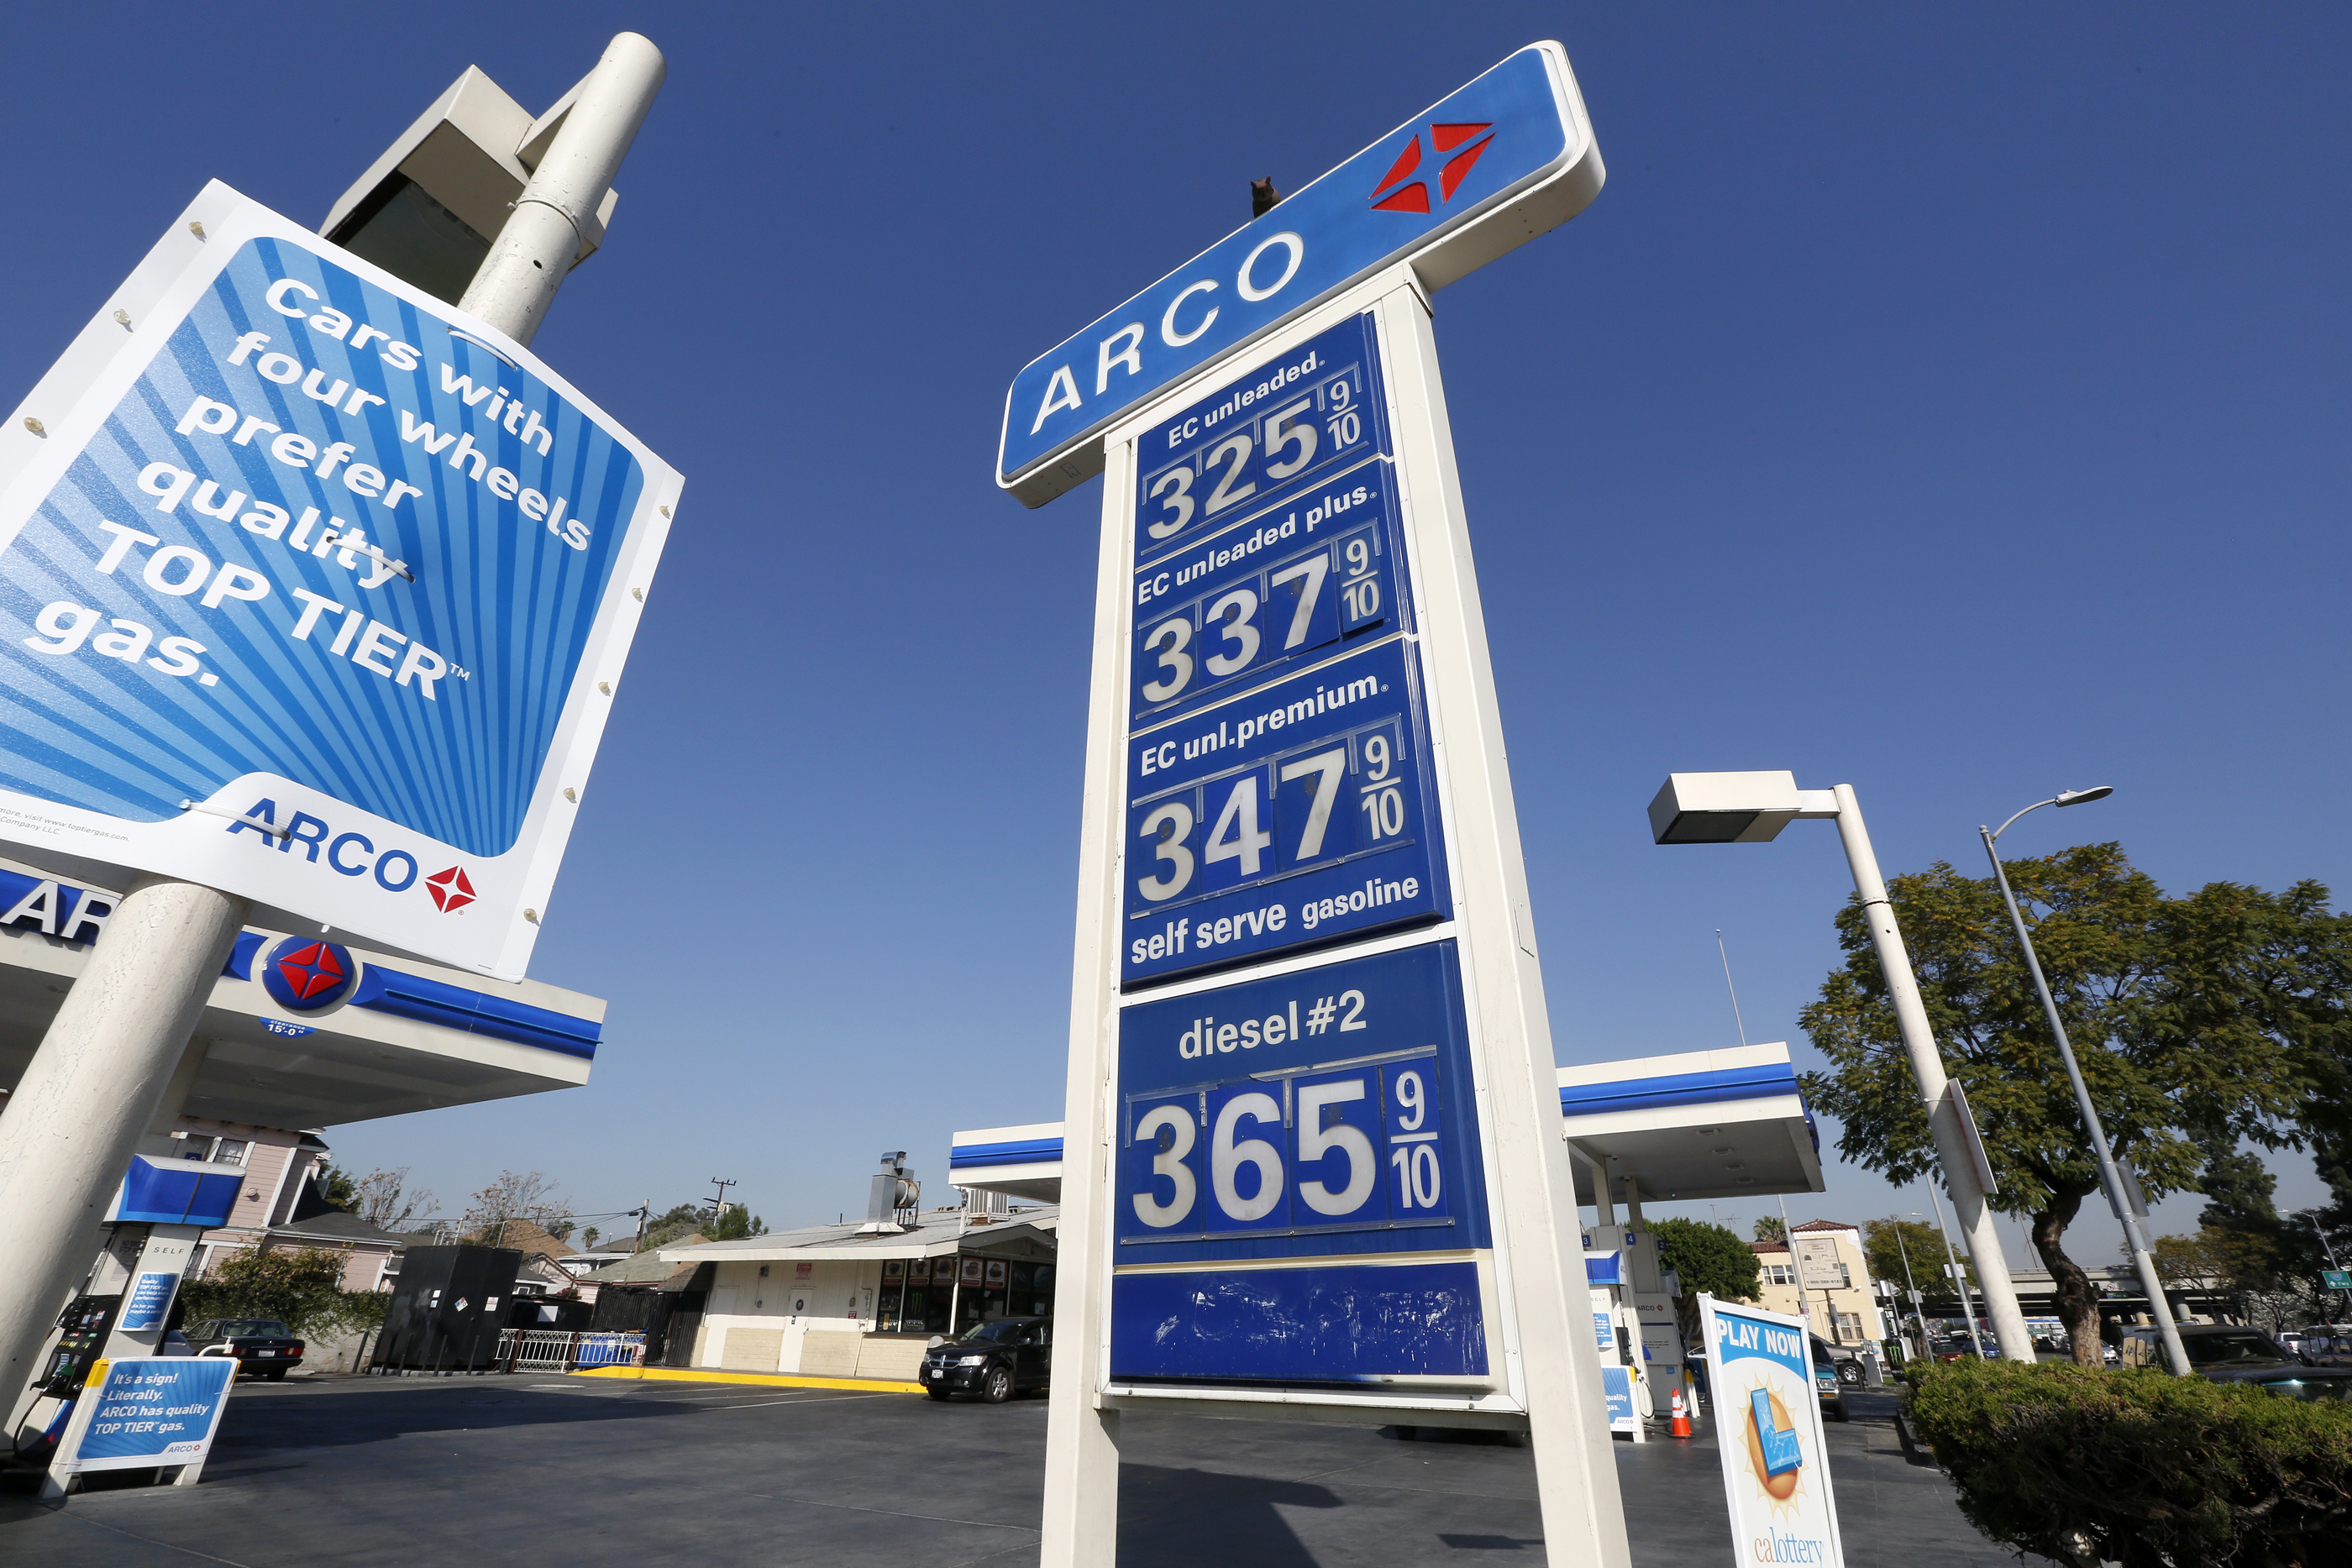 02/05/18 / LOS ANGELES/Gas prices in the Los Angeles area are skyrocketing. Motorists are being hit with a double whammy as wholesale oil prices around the world went up just as the tax hit. The result for Los Angeles County has been a whopping 21-cent increase in average pump prices since this time last week, according to the Auto Club of Southern California. (Photo by Aurelia Ventura/La Opinion)